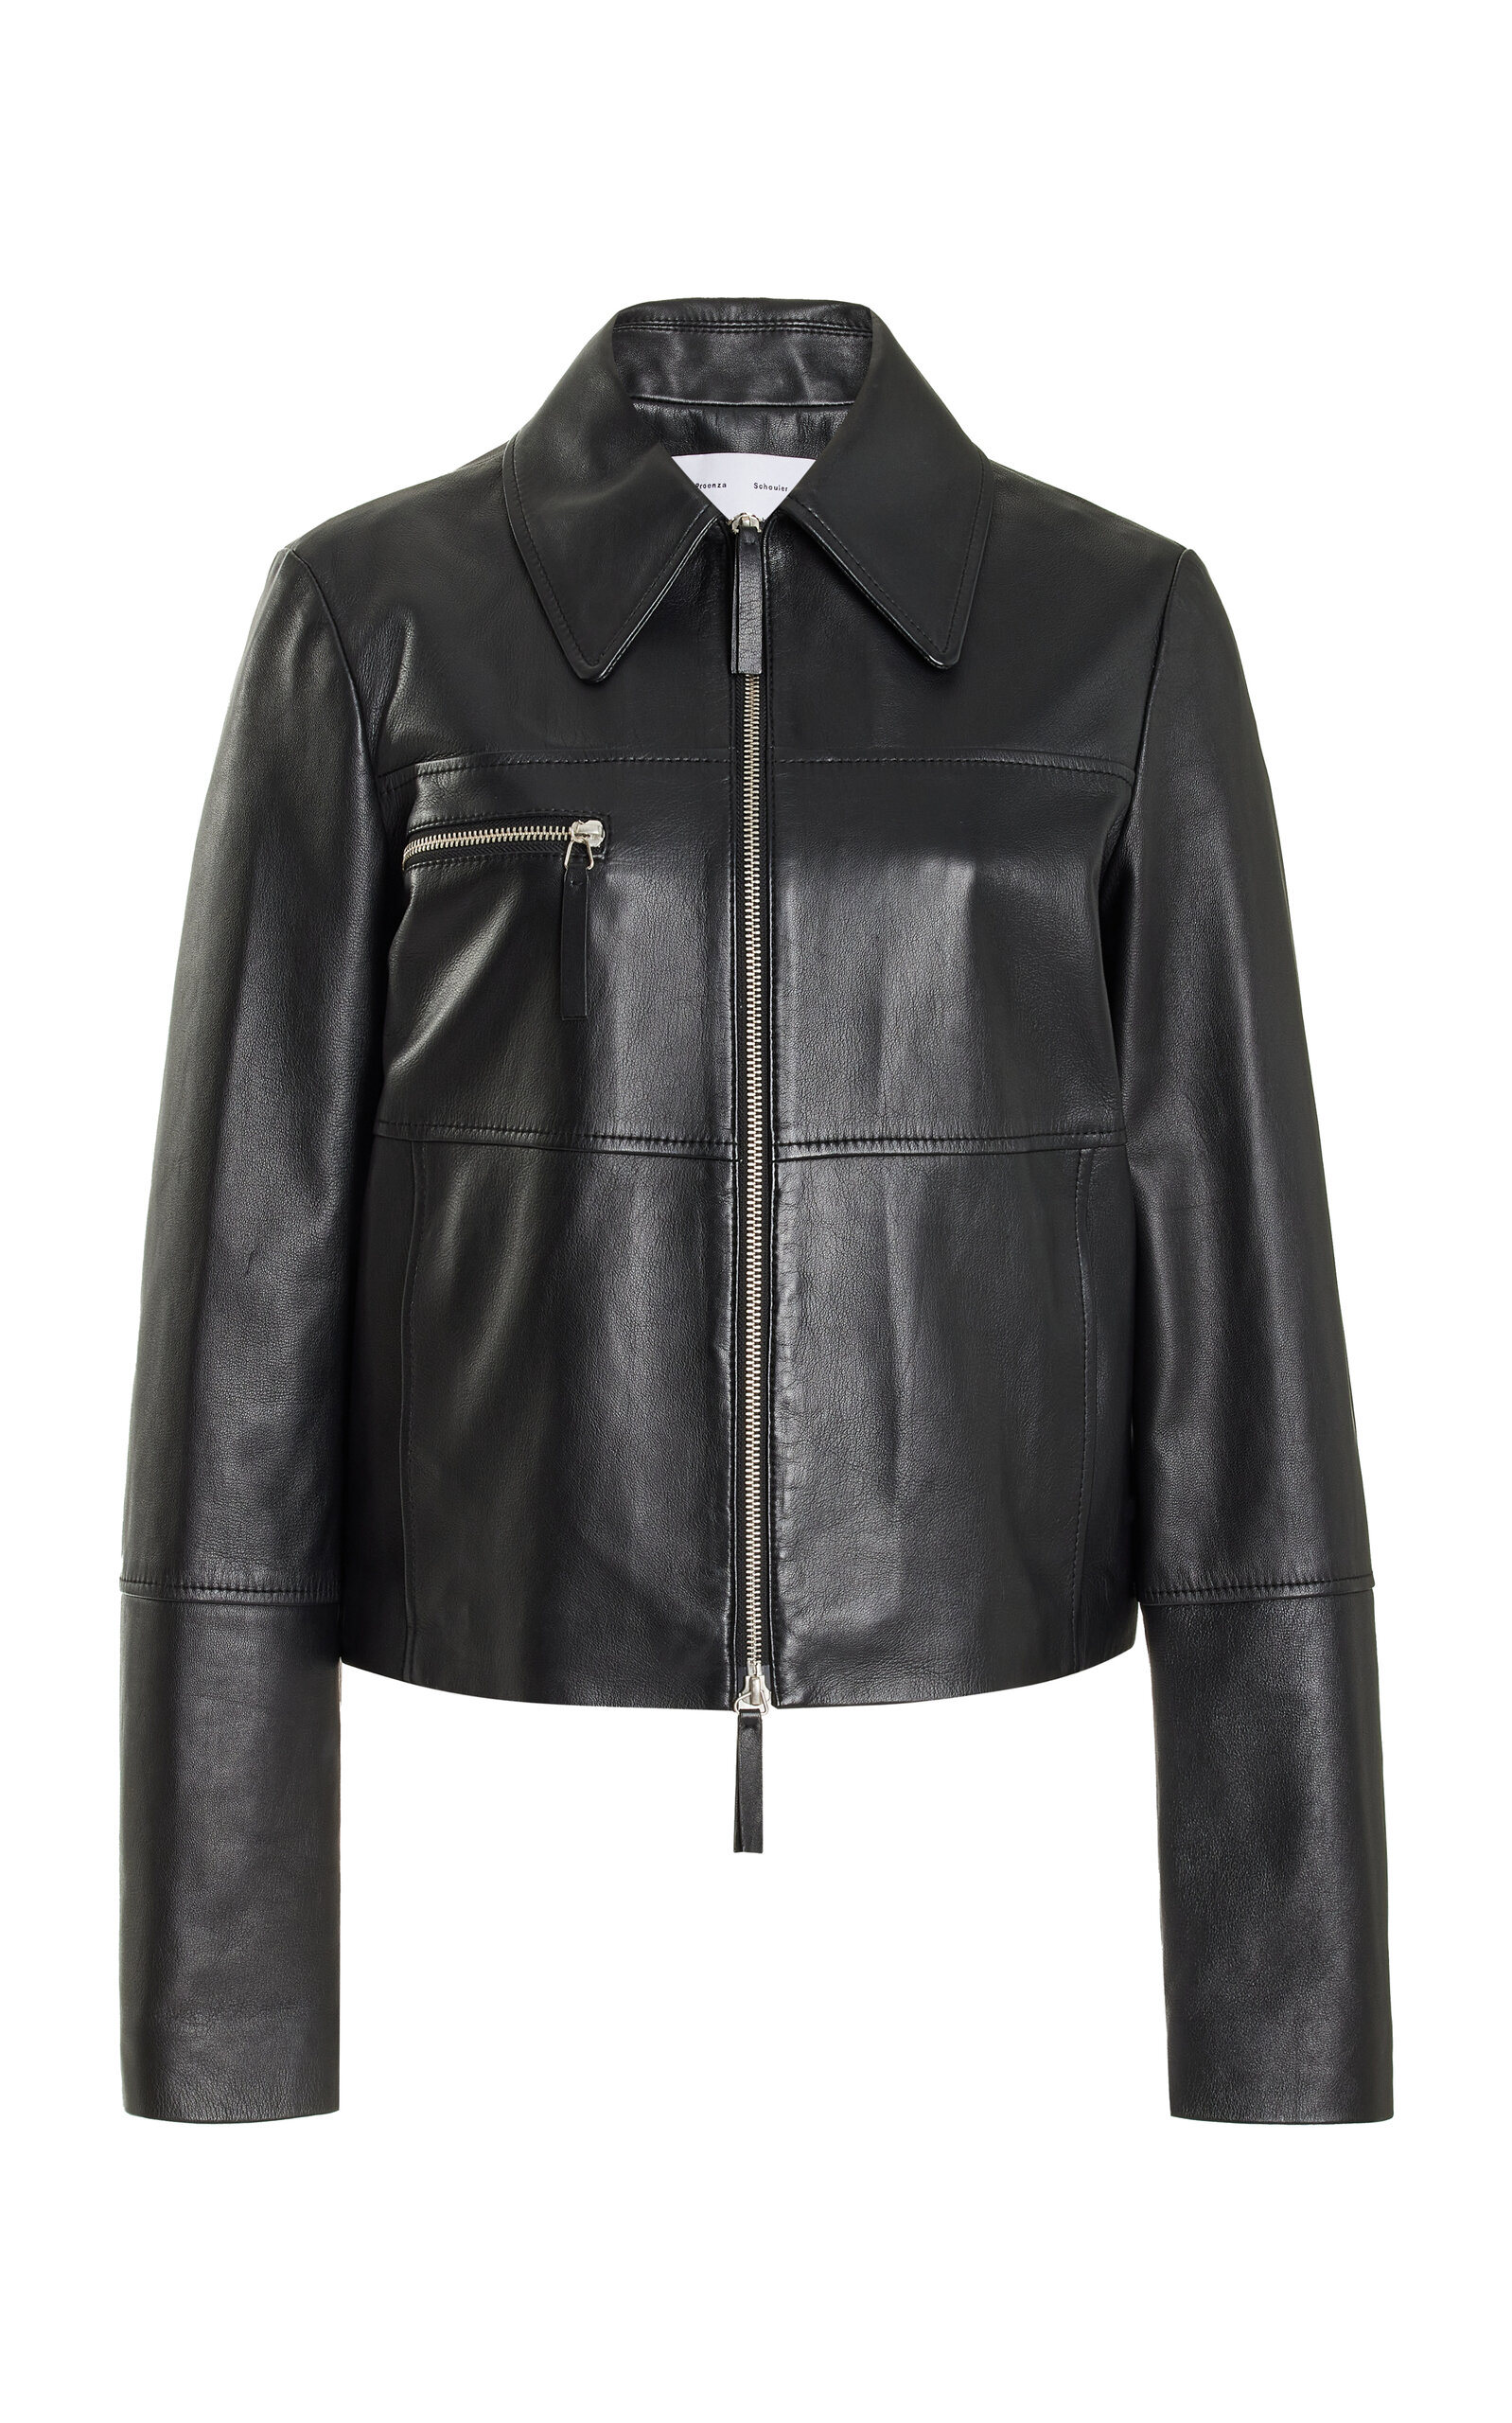 Proenza Schouler White Label Annabel Leather Jacket In Black